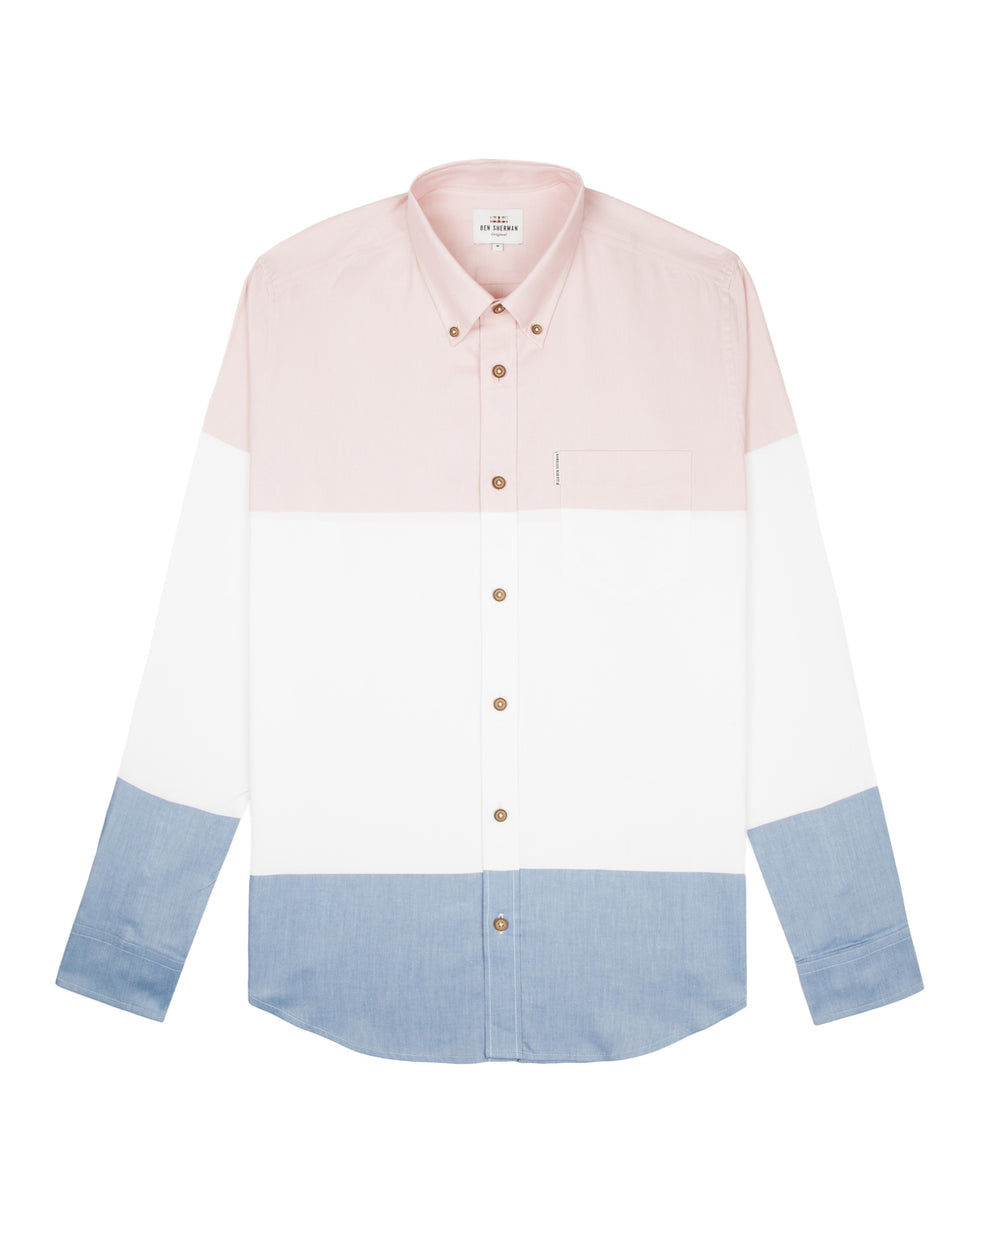 Long-Sleeve Pink White & Blue Striped Oxford Shirt - Pink